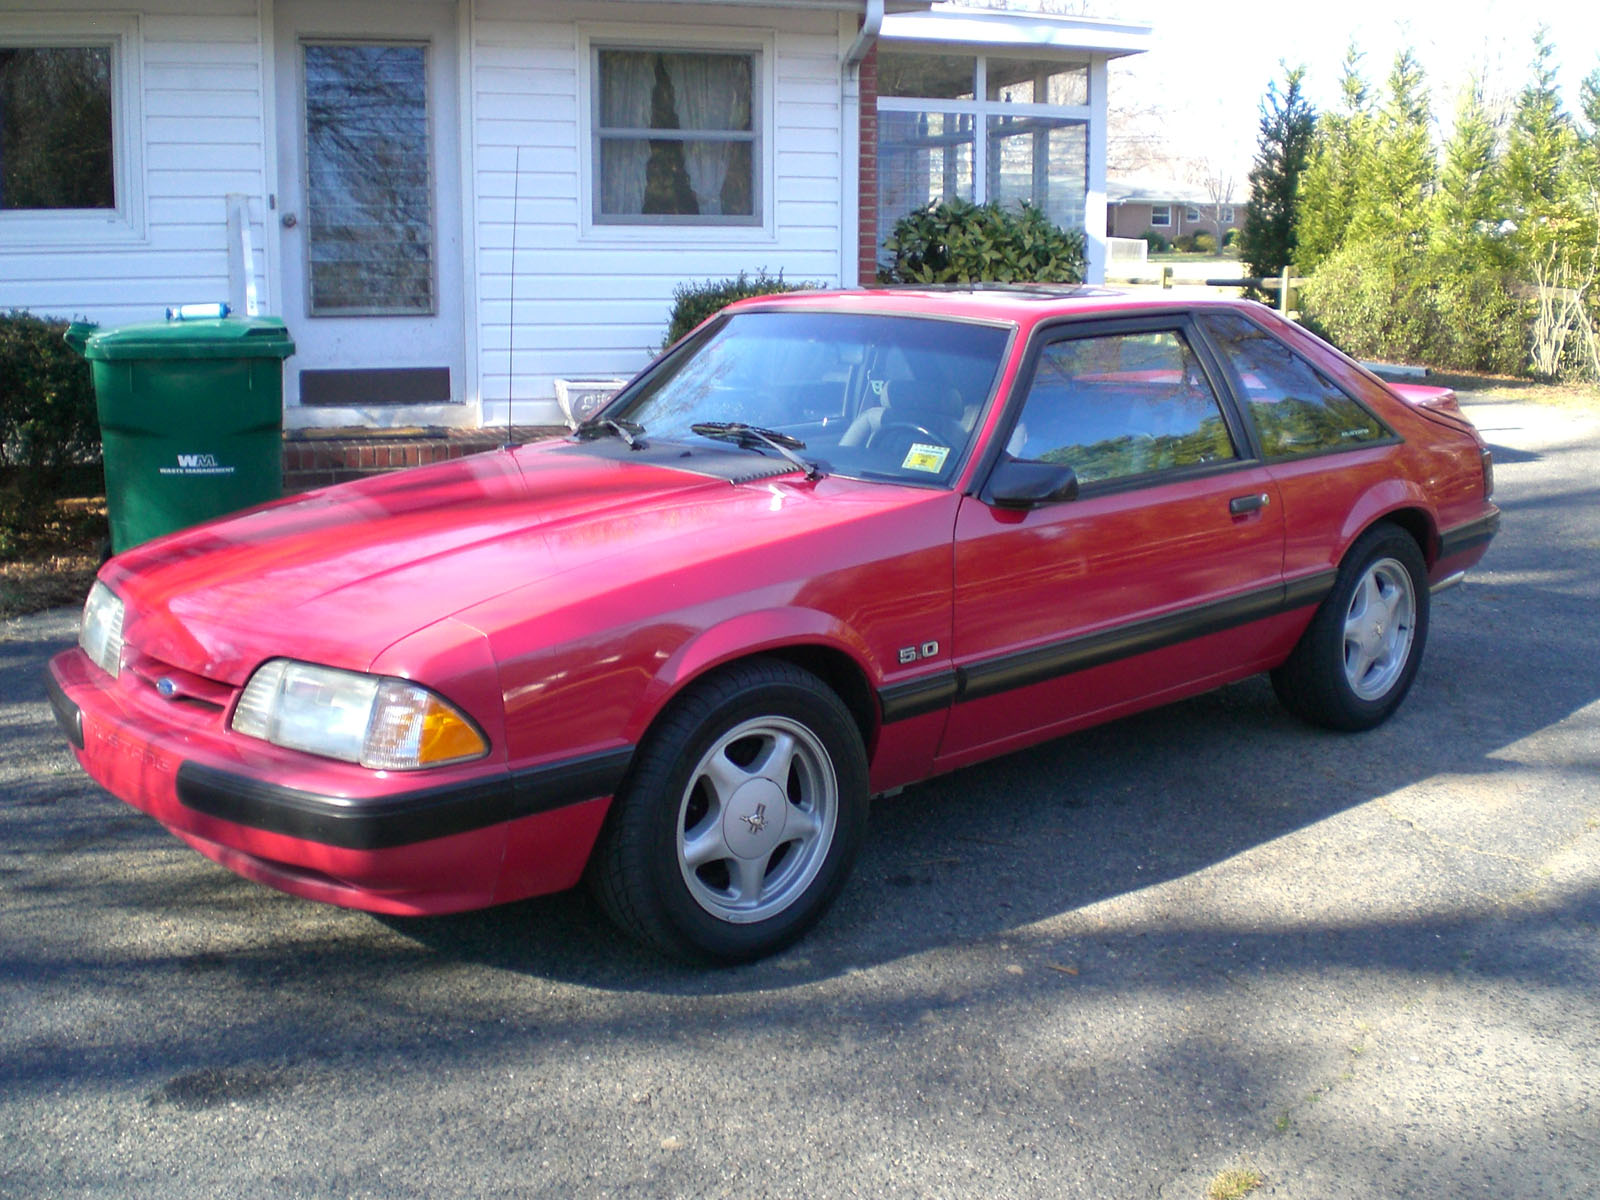  1991 Ford Mustang lx